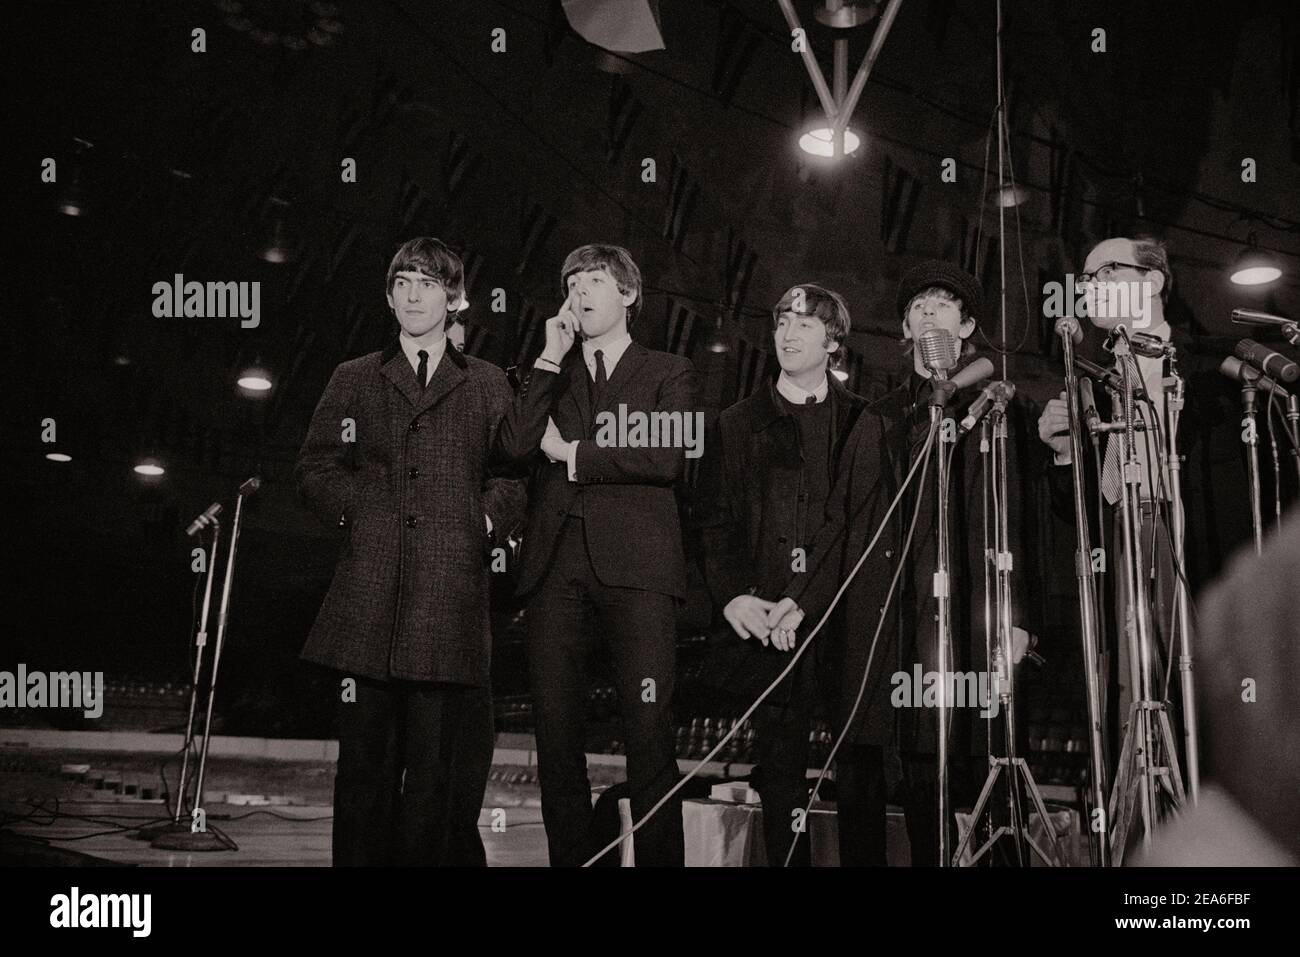 The Beatles arriving and press conference (British rock & rollers). USA. February 11, 1964 Stock Photo